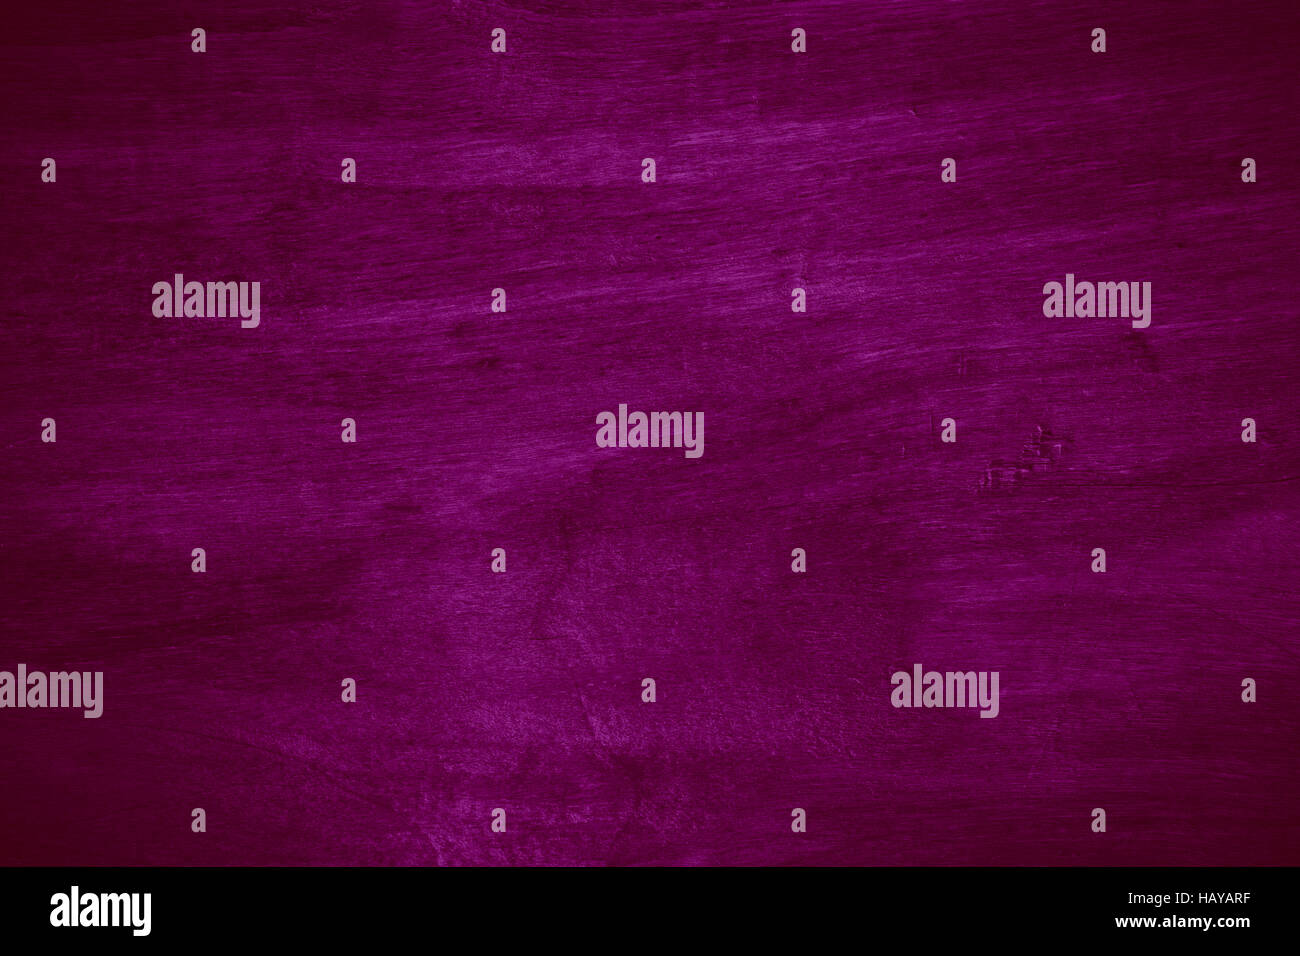 violet wooden texture or wood grain pattern background Stock Photo